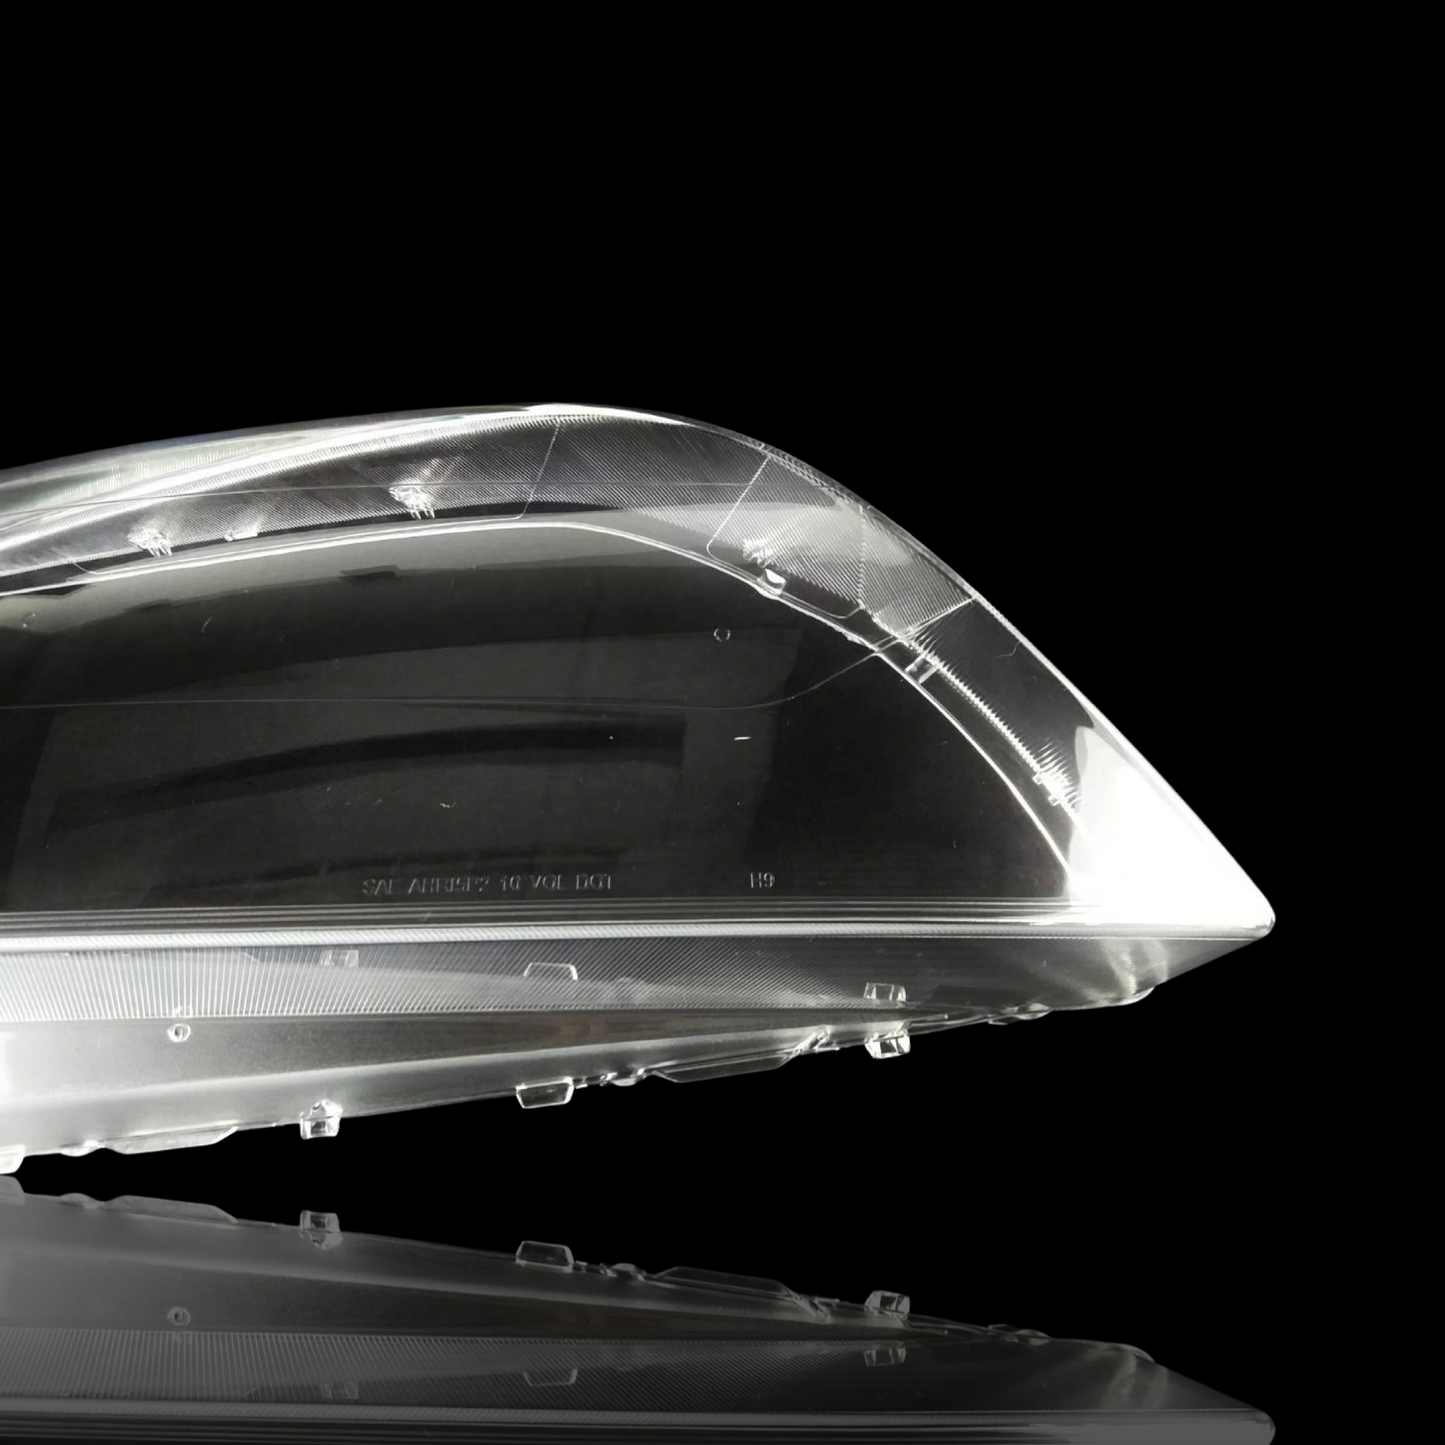 Cover Shell For Volvo XC60 (09-13) Old Model